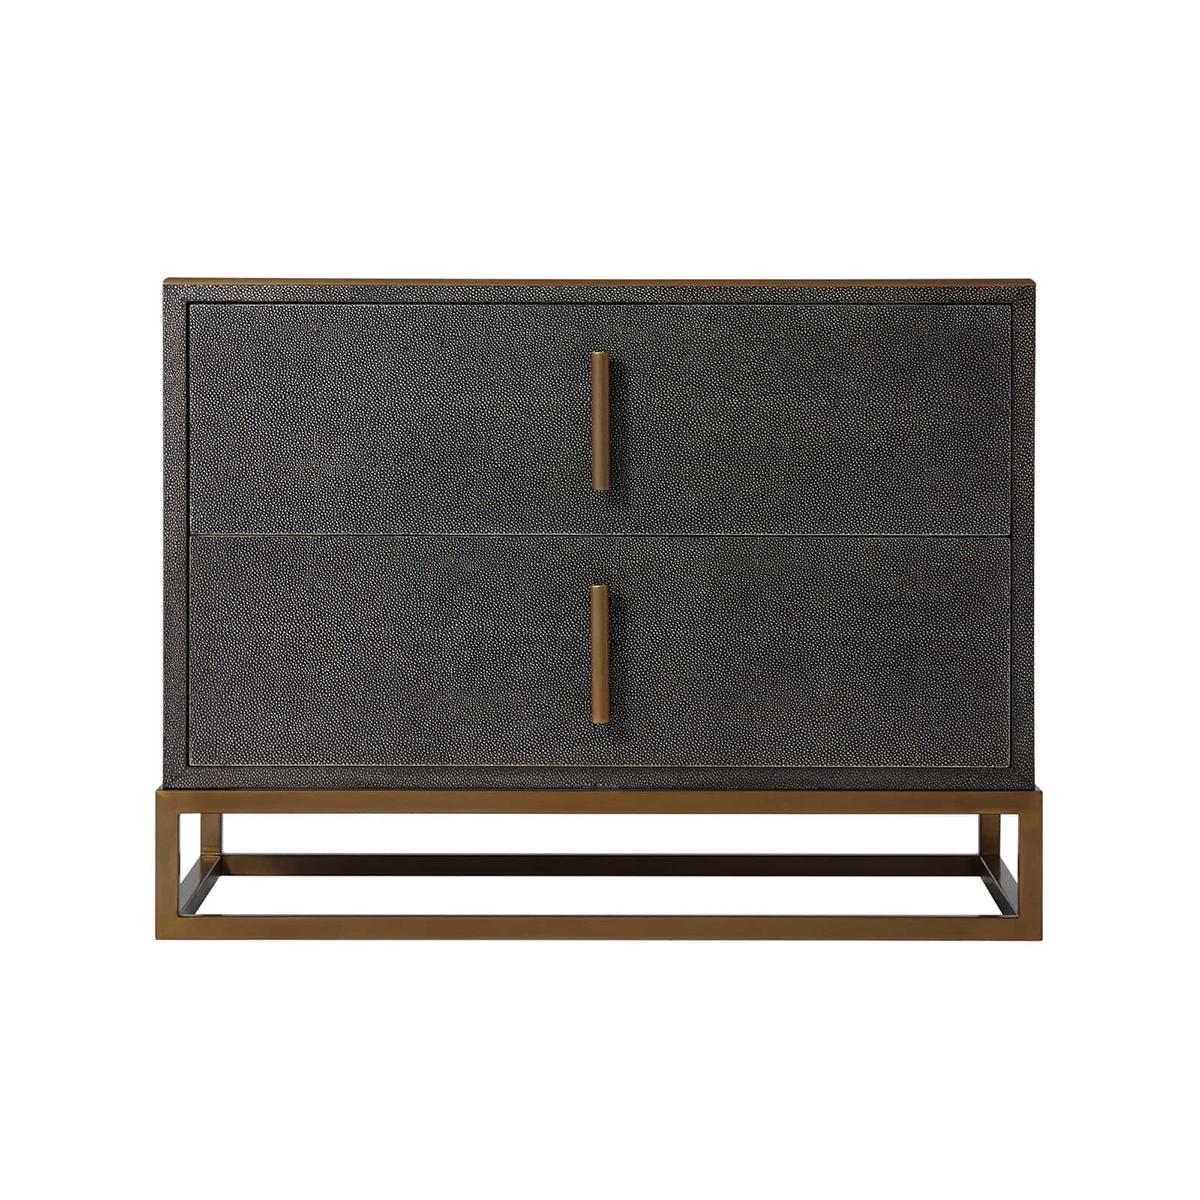 Modern leather nightstand with two drawers, a shagreen embossed dark tempest finish leather and brushed brass finish hardware and an open cube base.

Dimensions: 29.5